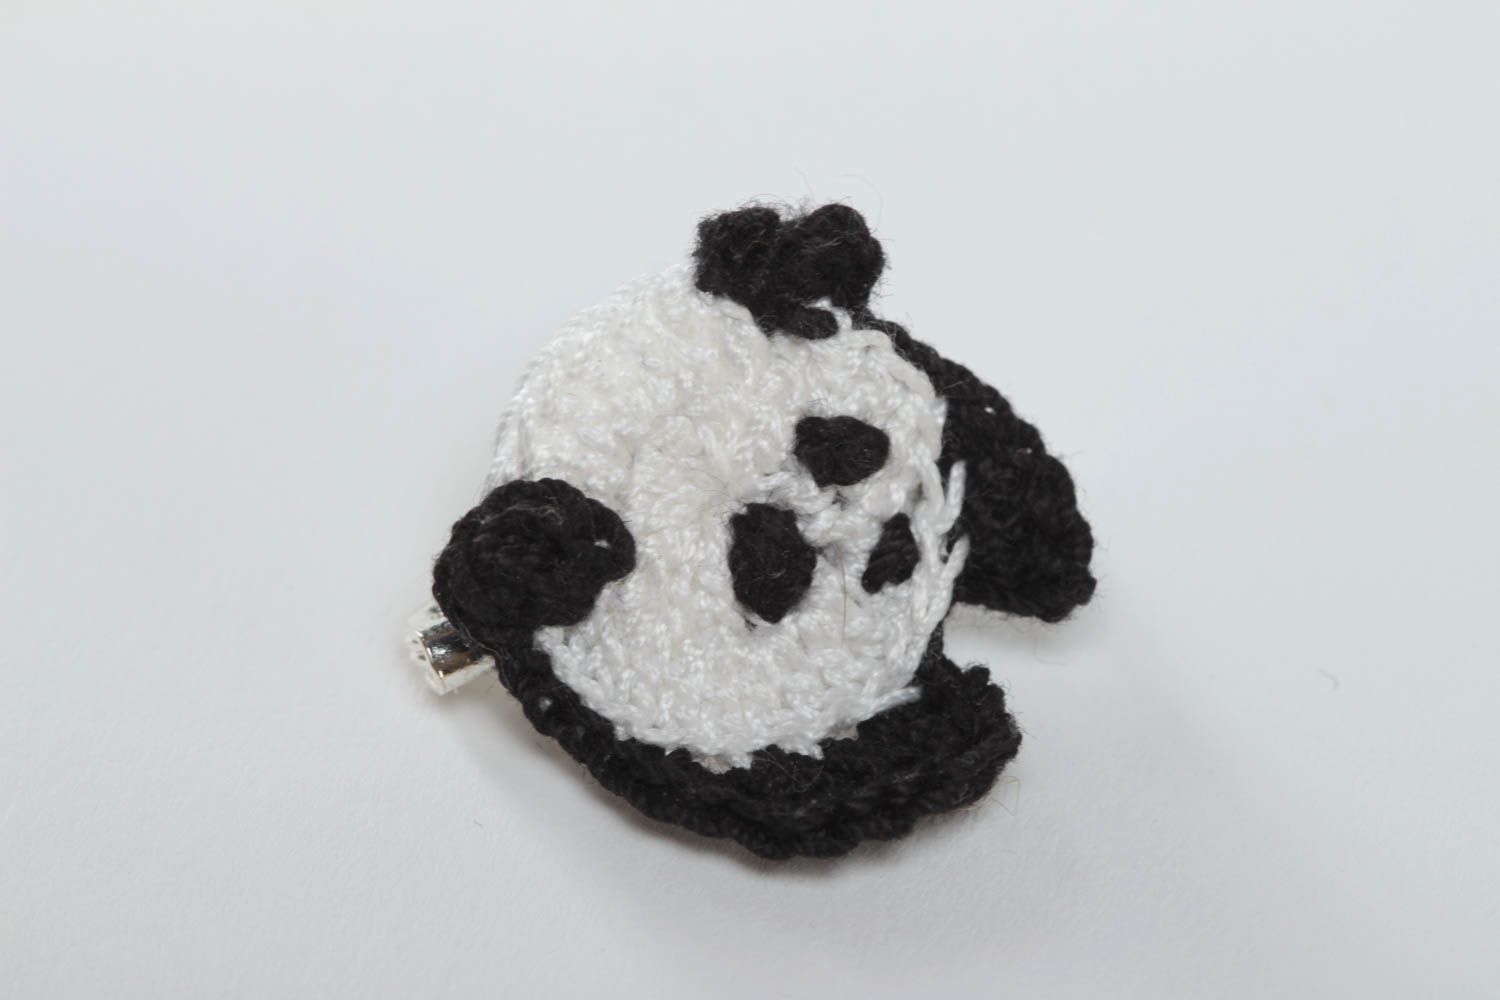 Cotton crocheted handmade baby brooch in the form of panda designer jewelry photo 2